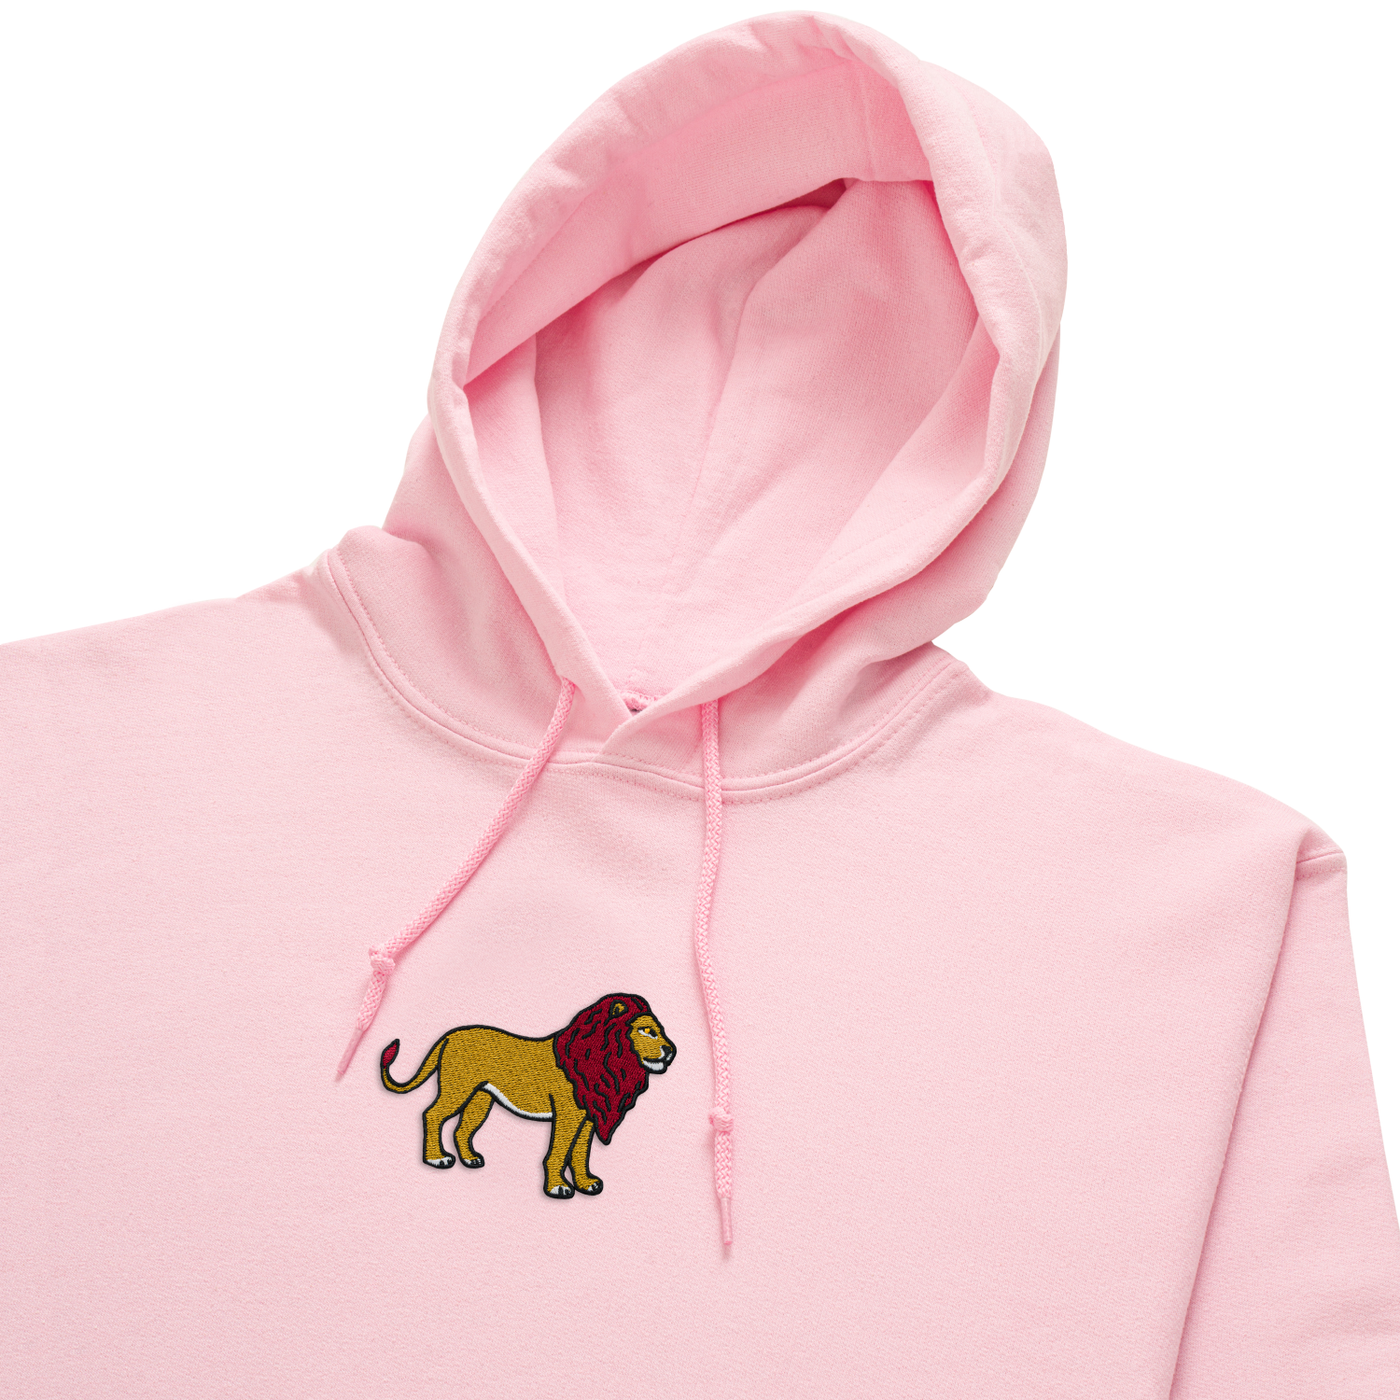 Bobby's Planet Women's Embroidered Lion Hoodie from African Animals Collection in Light Pink Color#color_light-pink